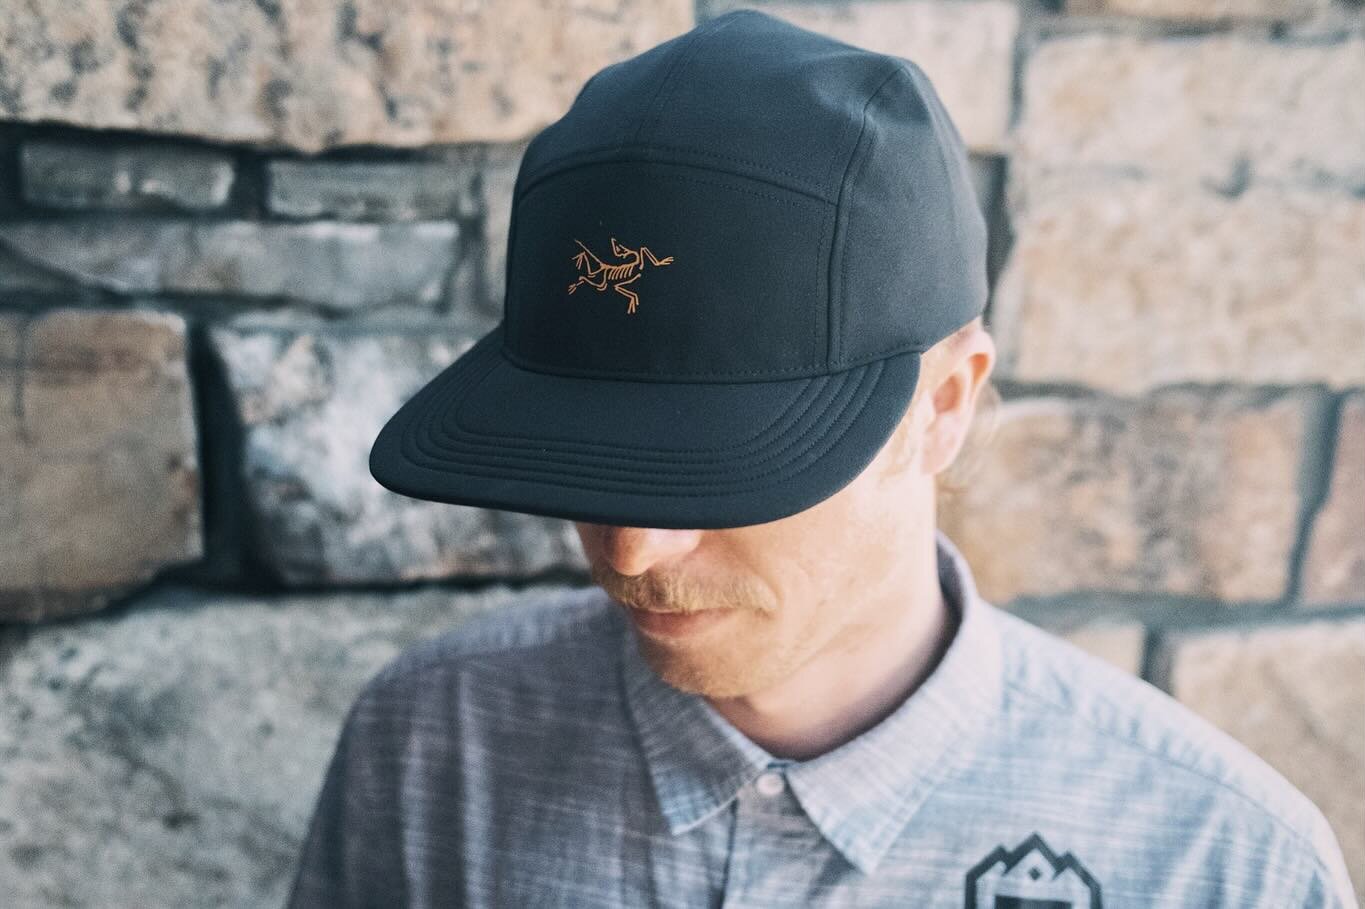 New @arcteryx hats in the shop! These ones will go fast, come check them out! 🤙